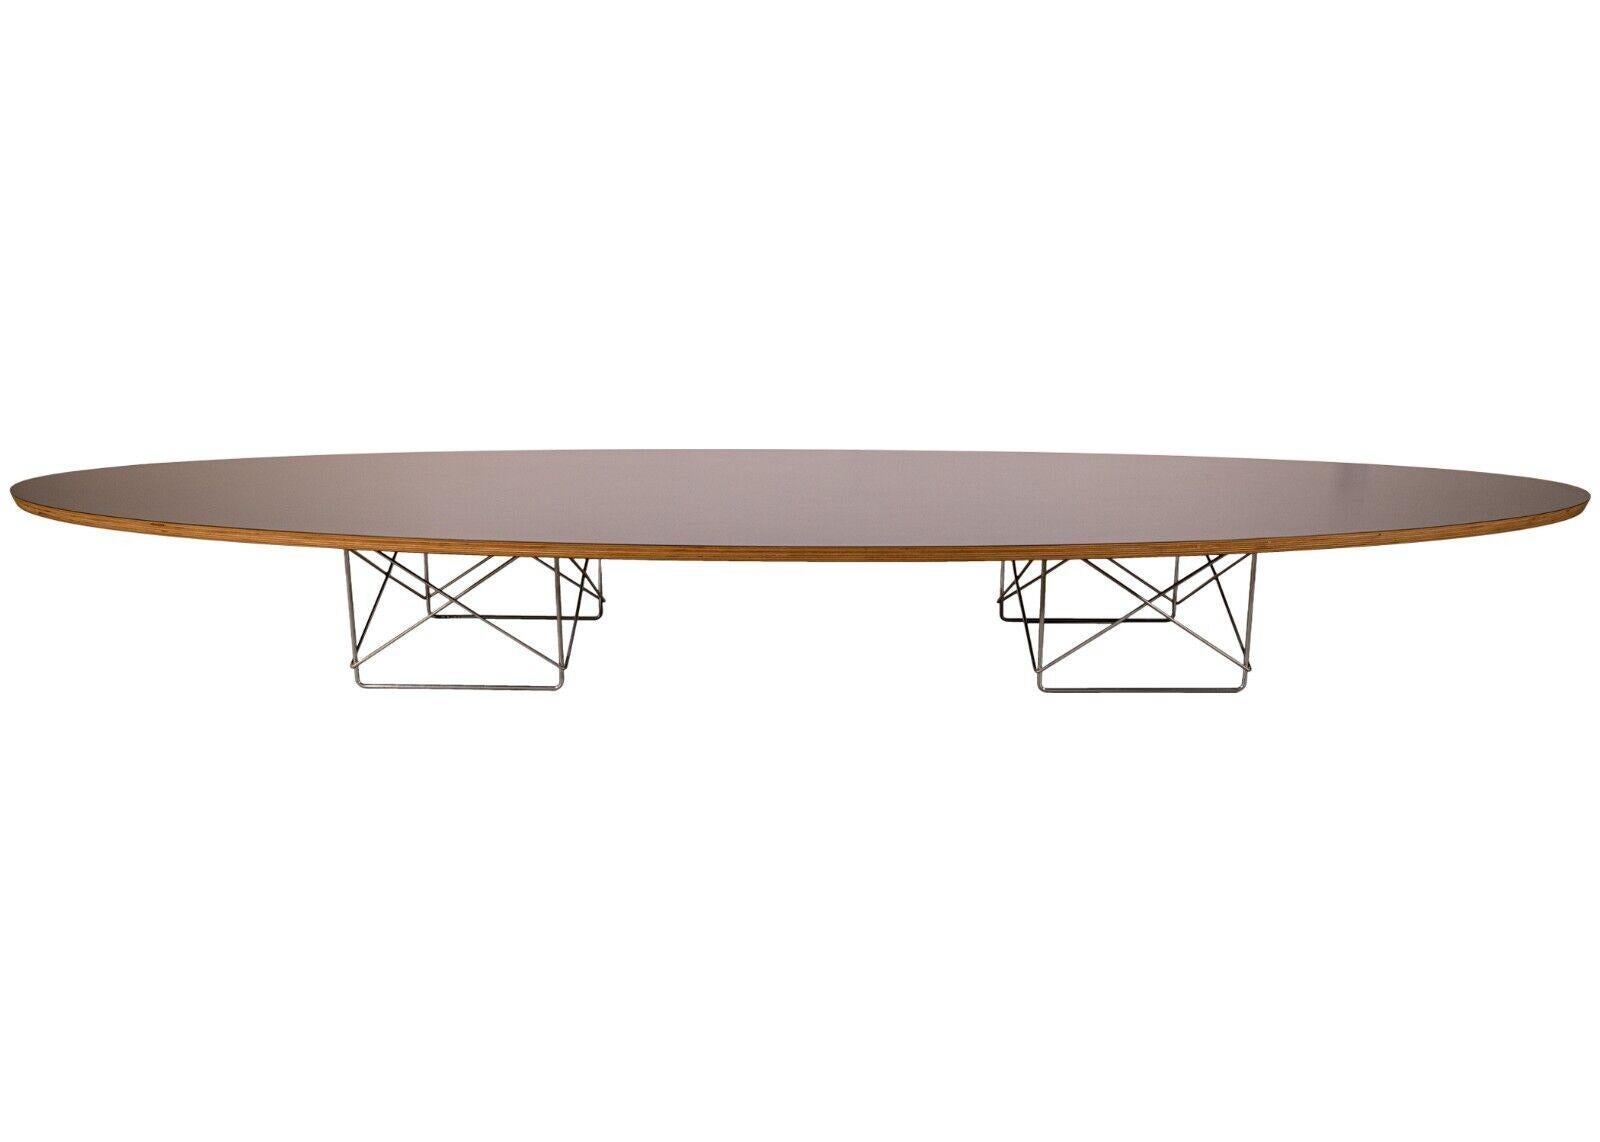 A Herman Miller Eames elliptical surfboard coffee table. A very stunning coffee table from legendary designers Herman Miller and Eames. This very low coffee table takes the shape of a long surfboard. This piece is constructed with a layered wood